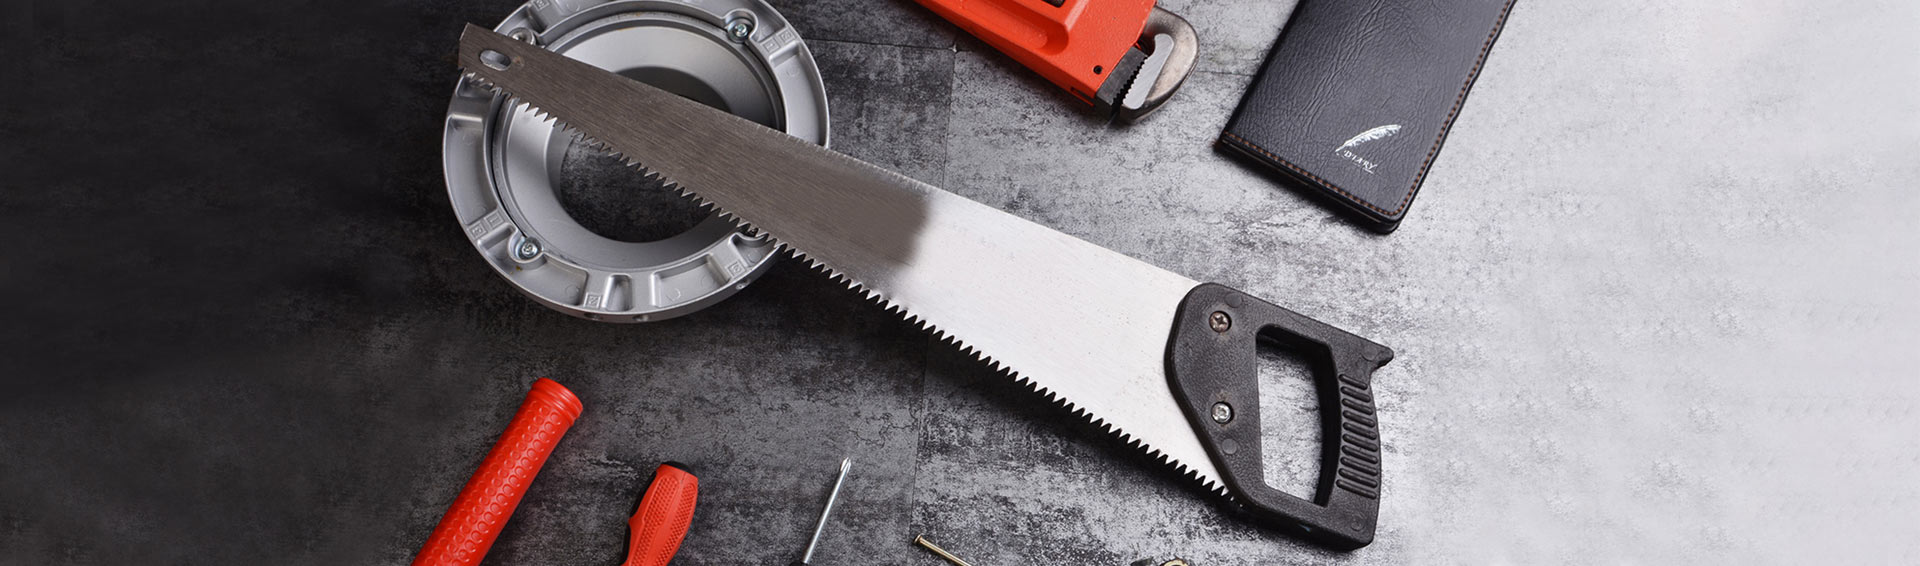 Hand Saw Buying Guide | Lowe's